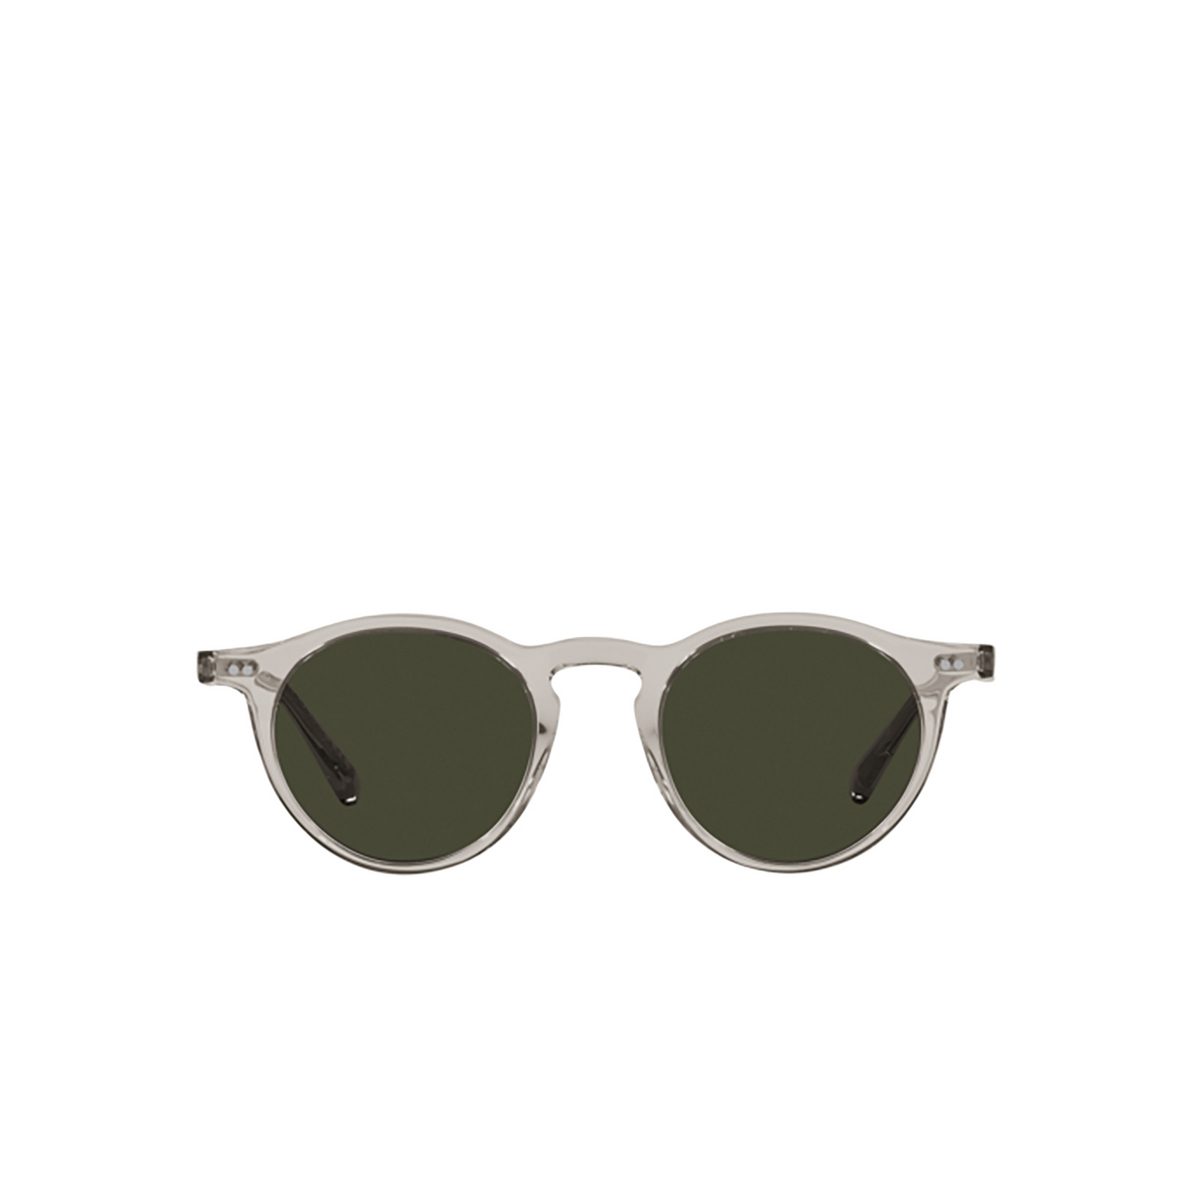 Oliver Peoples OP-13 Sunglasses 1757P1 Gravel - front view